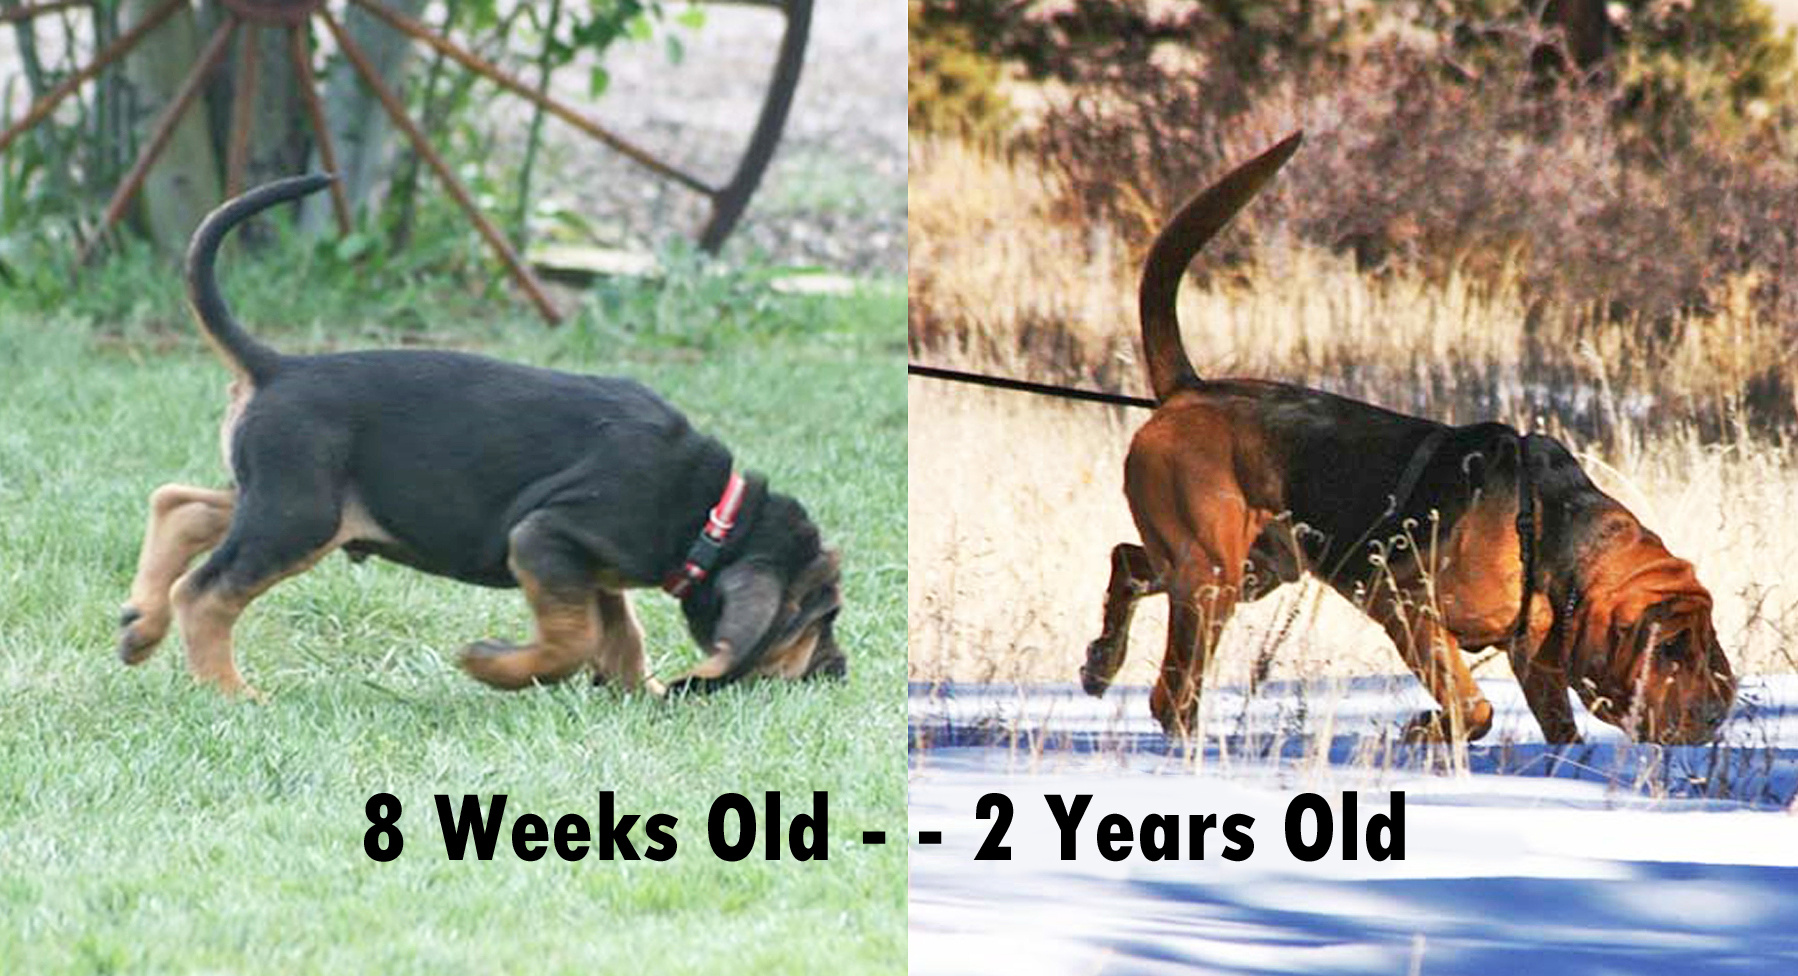 Major at 8 Weeks, then 2 Yrs Old.
He is a balanced, honest dog!